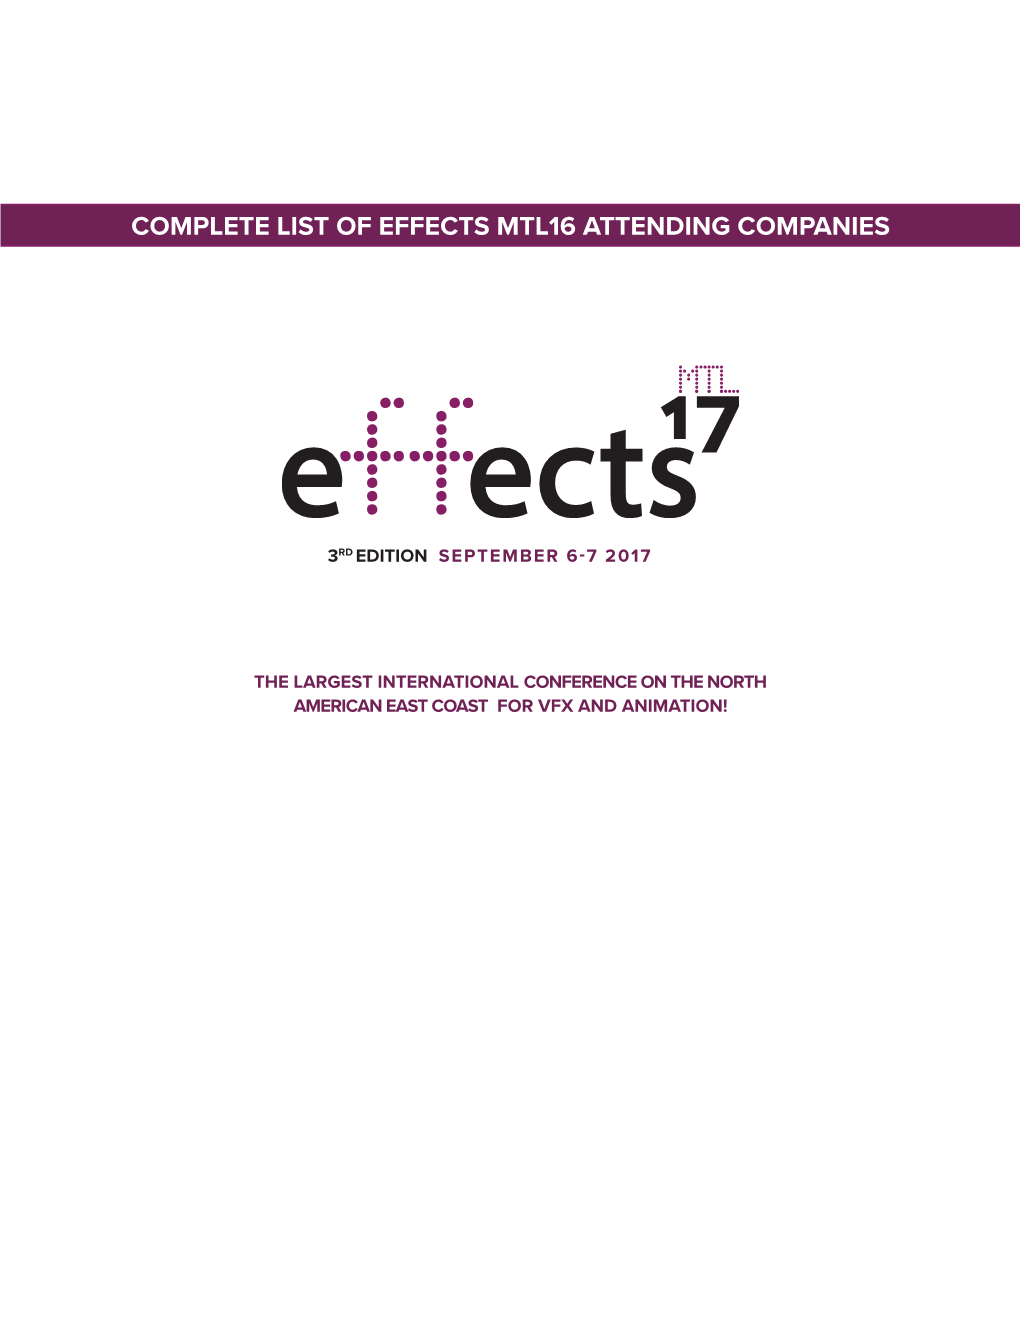 Complete List of Effects Mtl16 Attending Companies